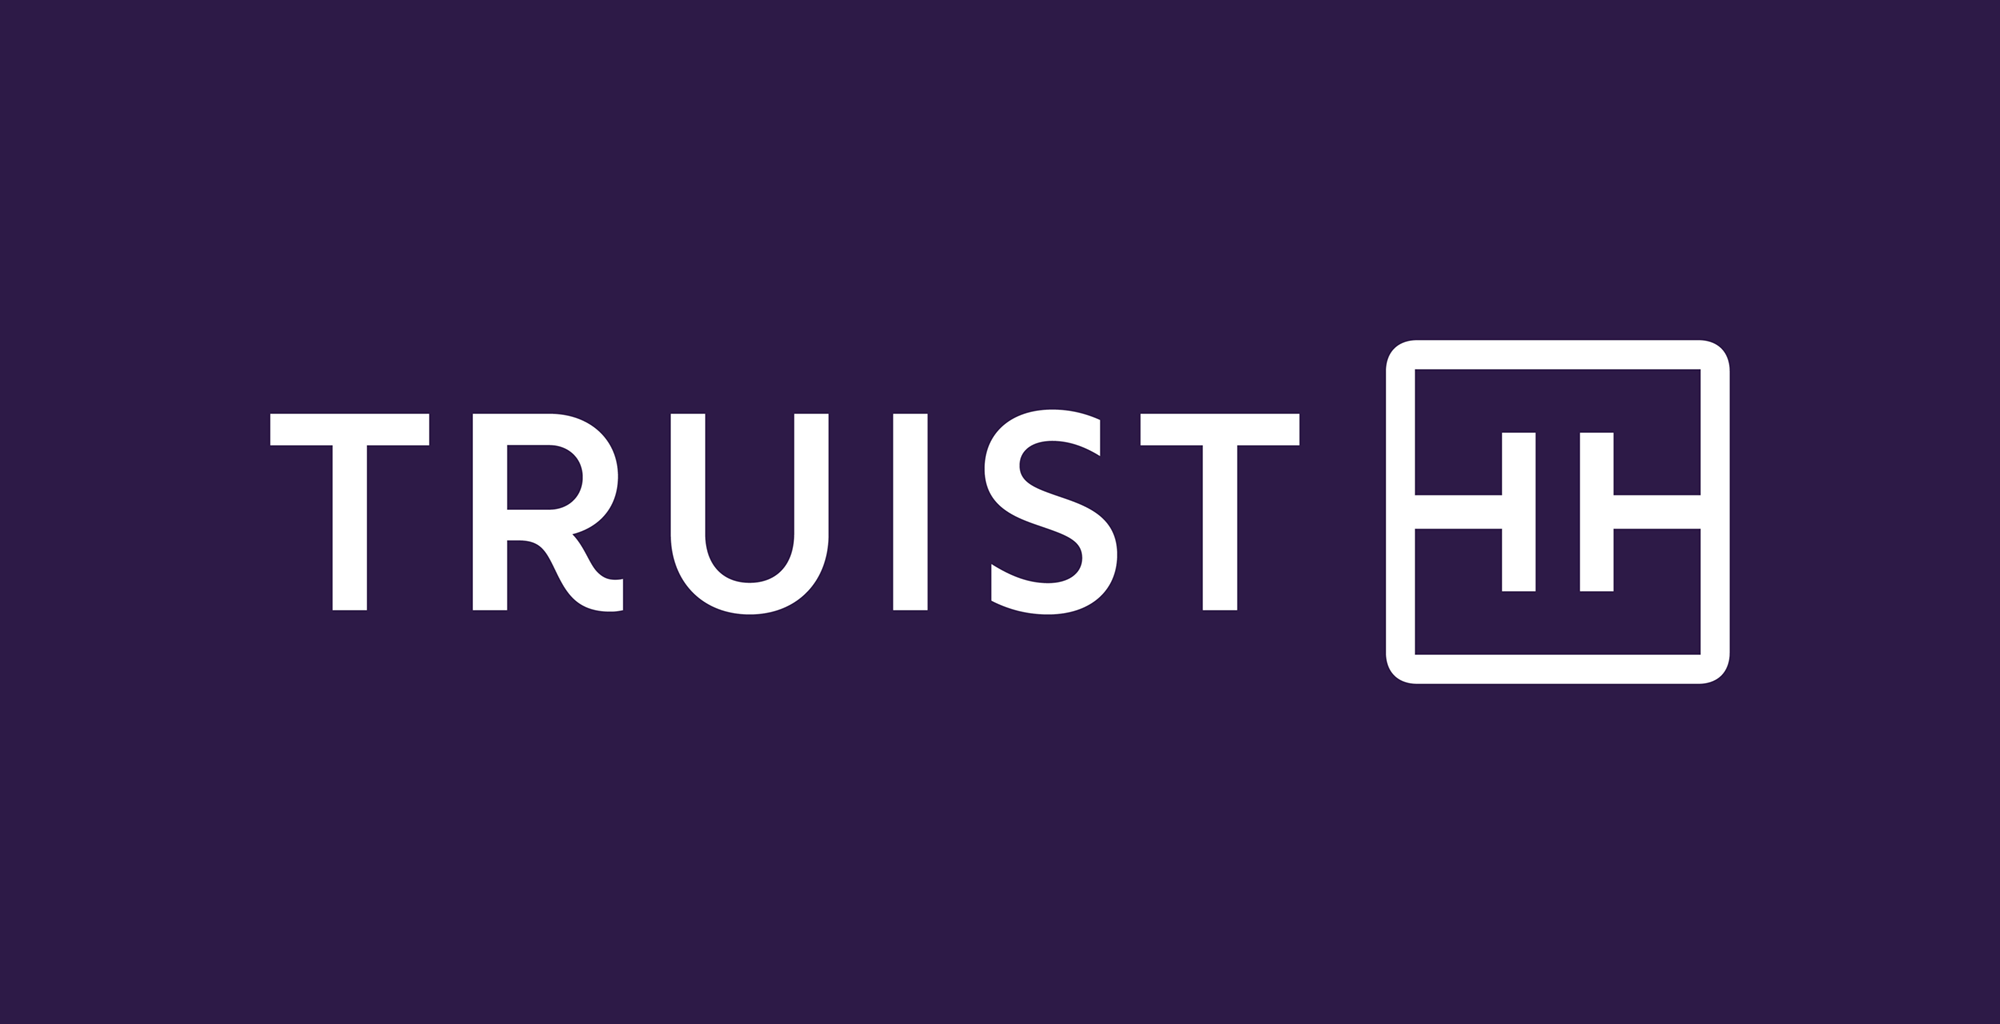 New Name and Logo for Truist by Interbrand